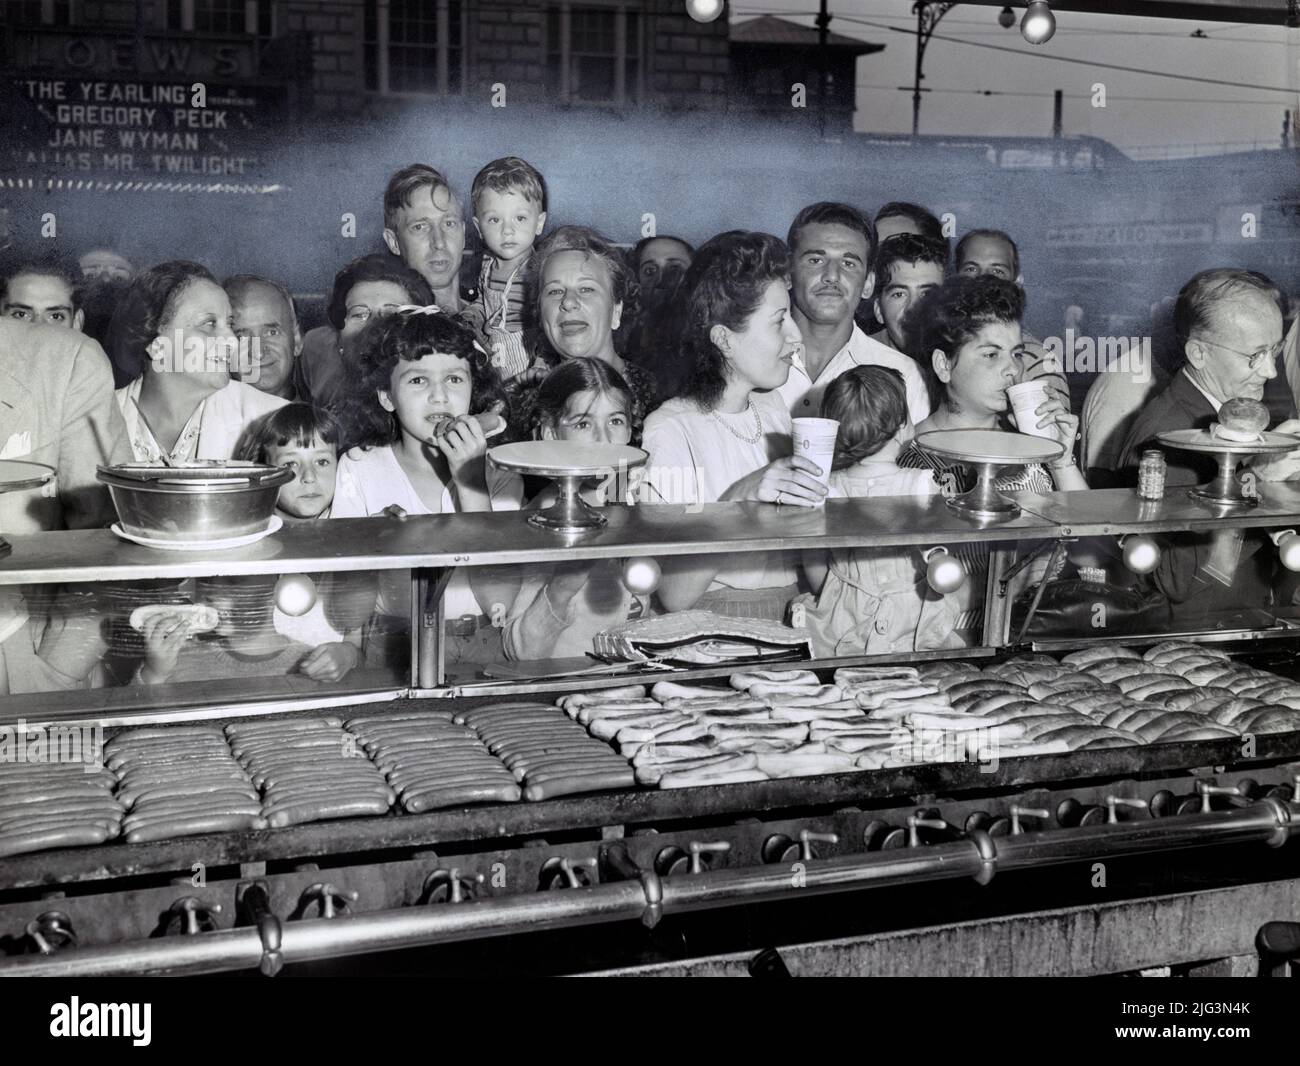 Group of People lined up at Counter, Nathan's Famous Hot Dogs, Coney Island, Brooklyn, New York City, New York, USA, Al Ravenna, New York World-Telegram and the Sun Newspaper Photograph Collection, Al Aumiller, New York World-Telegram and the Sun Newspaper Photograph Collection, July 1947 Stock Photo